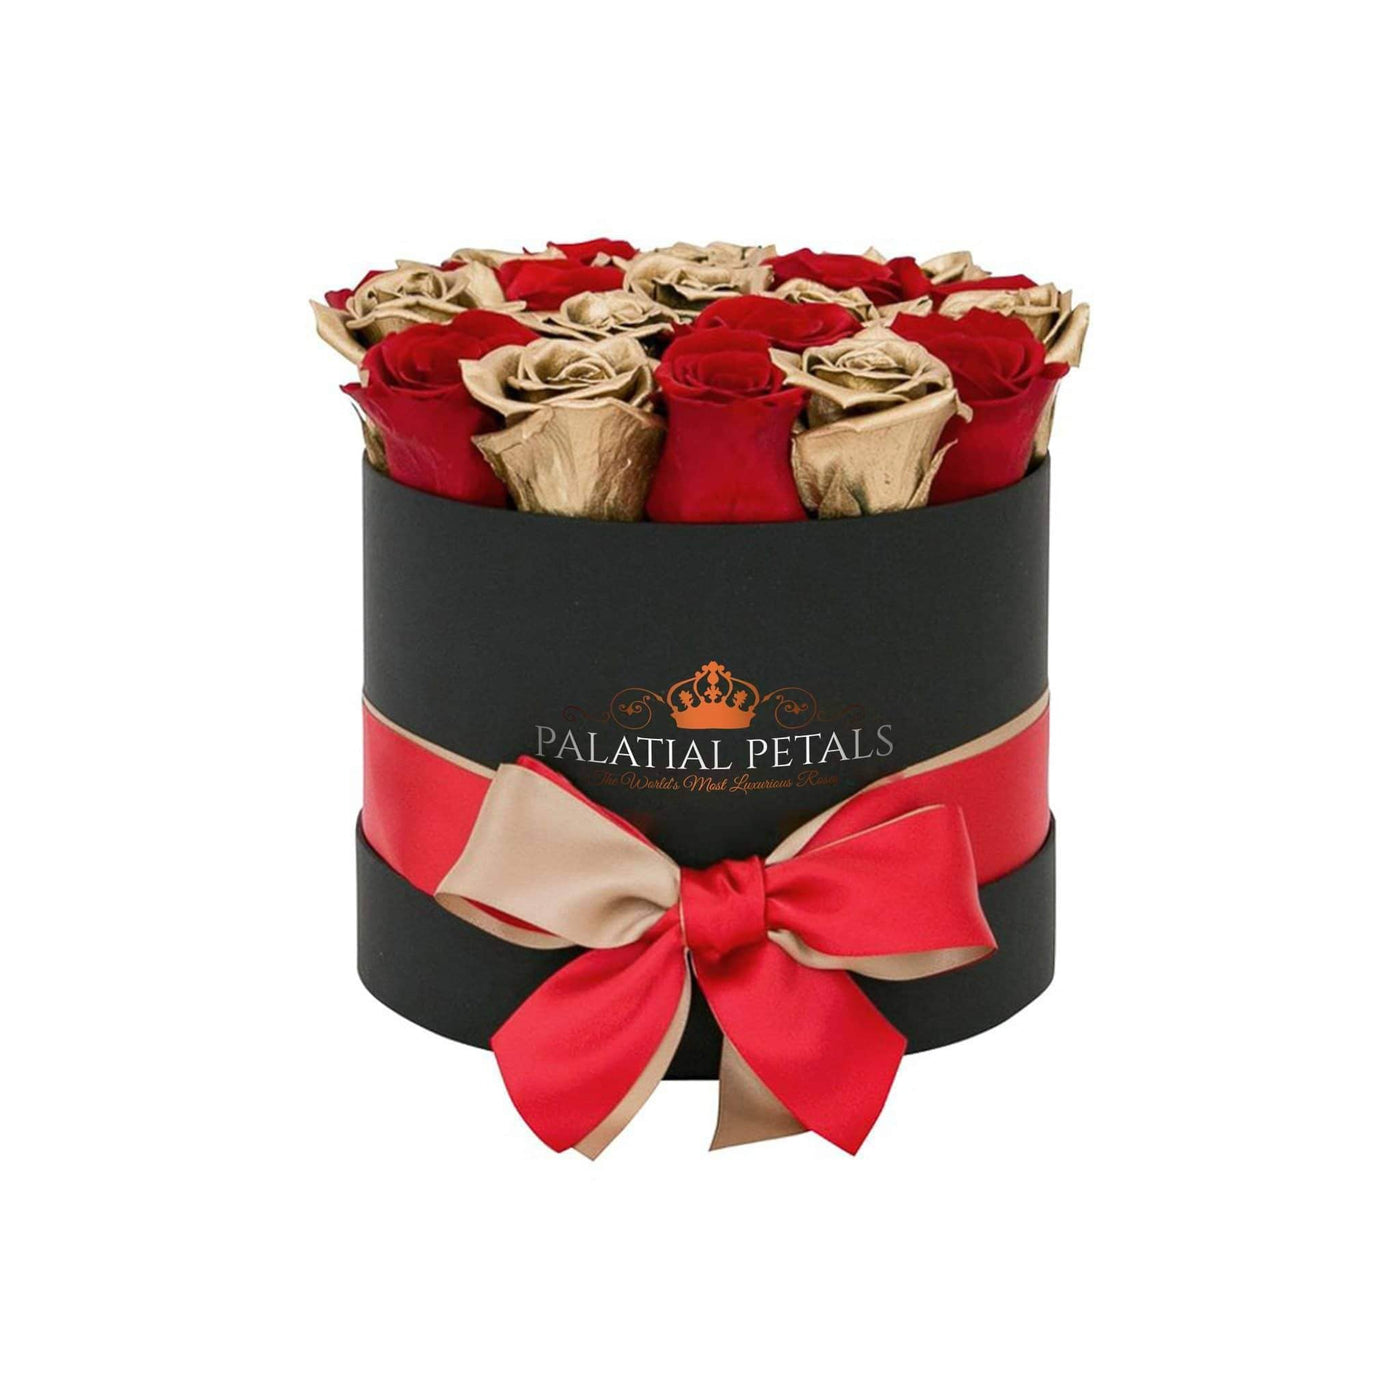 24K Gold & Red Roses That Last A Year - Classic Rose Box